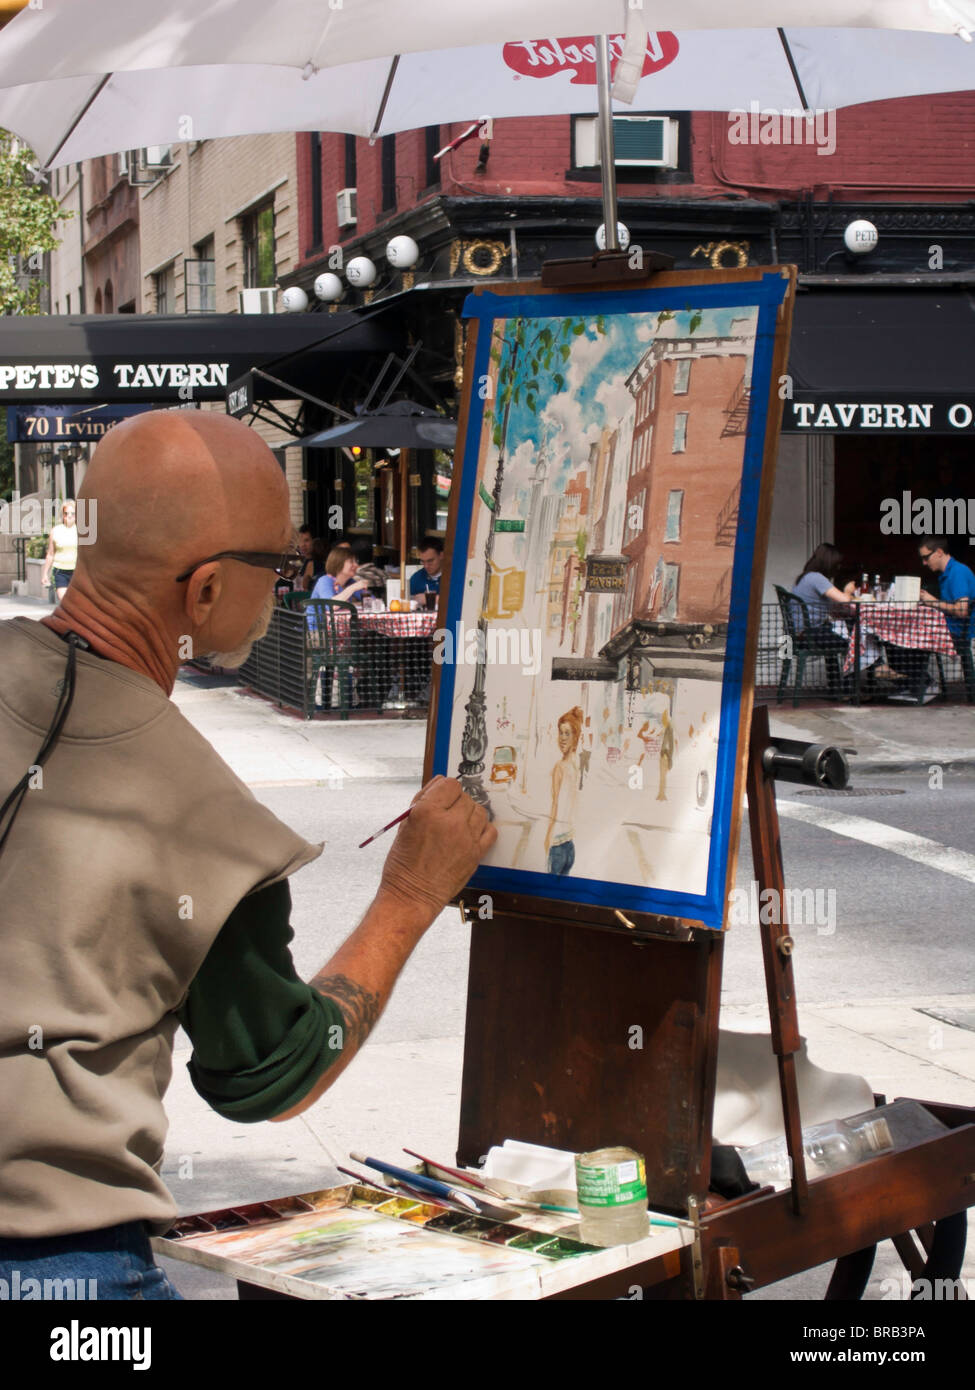 Artist Painting Pete's Tavern, Irving Place, NYC Stock Photo